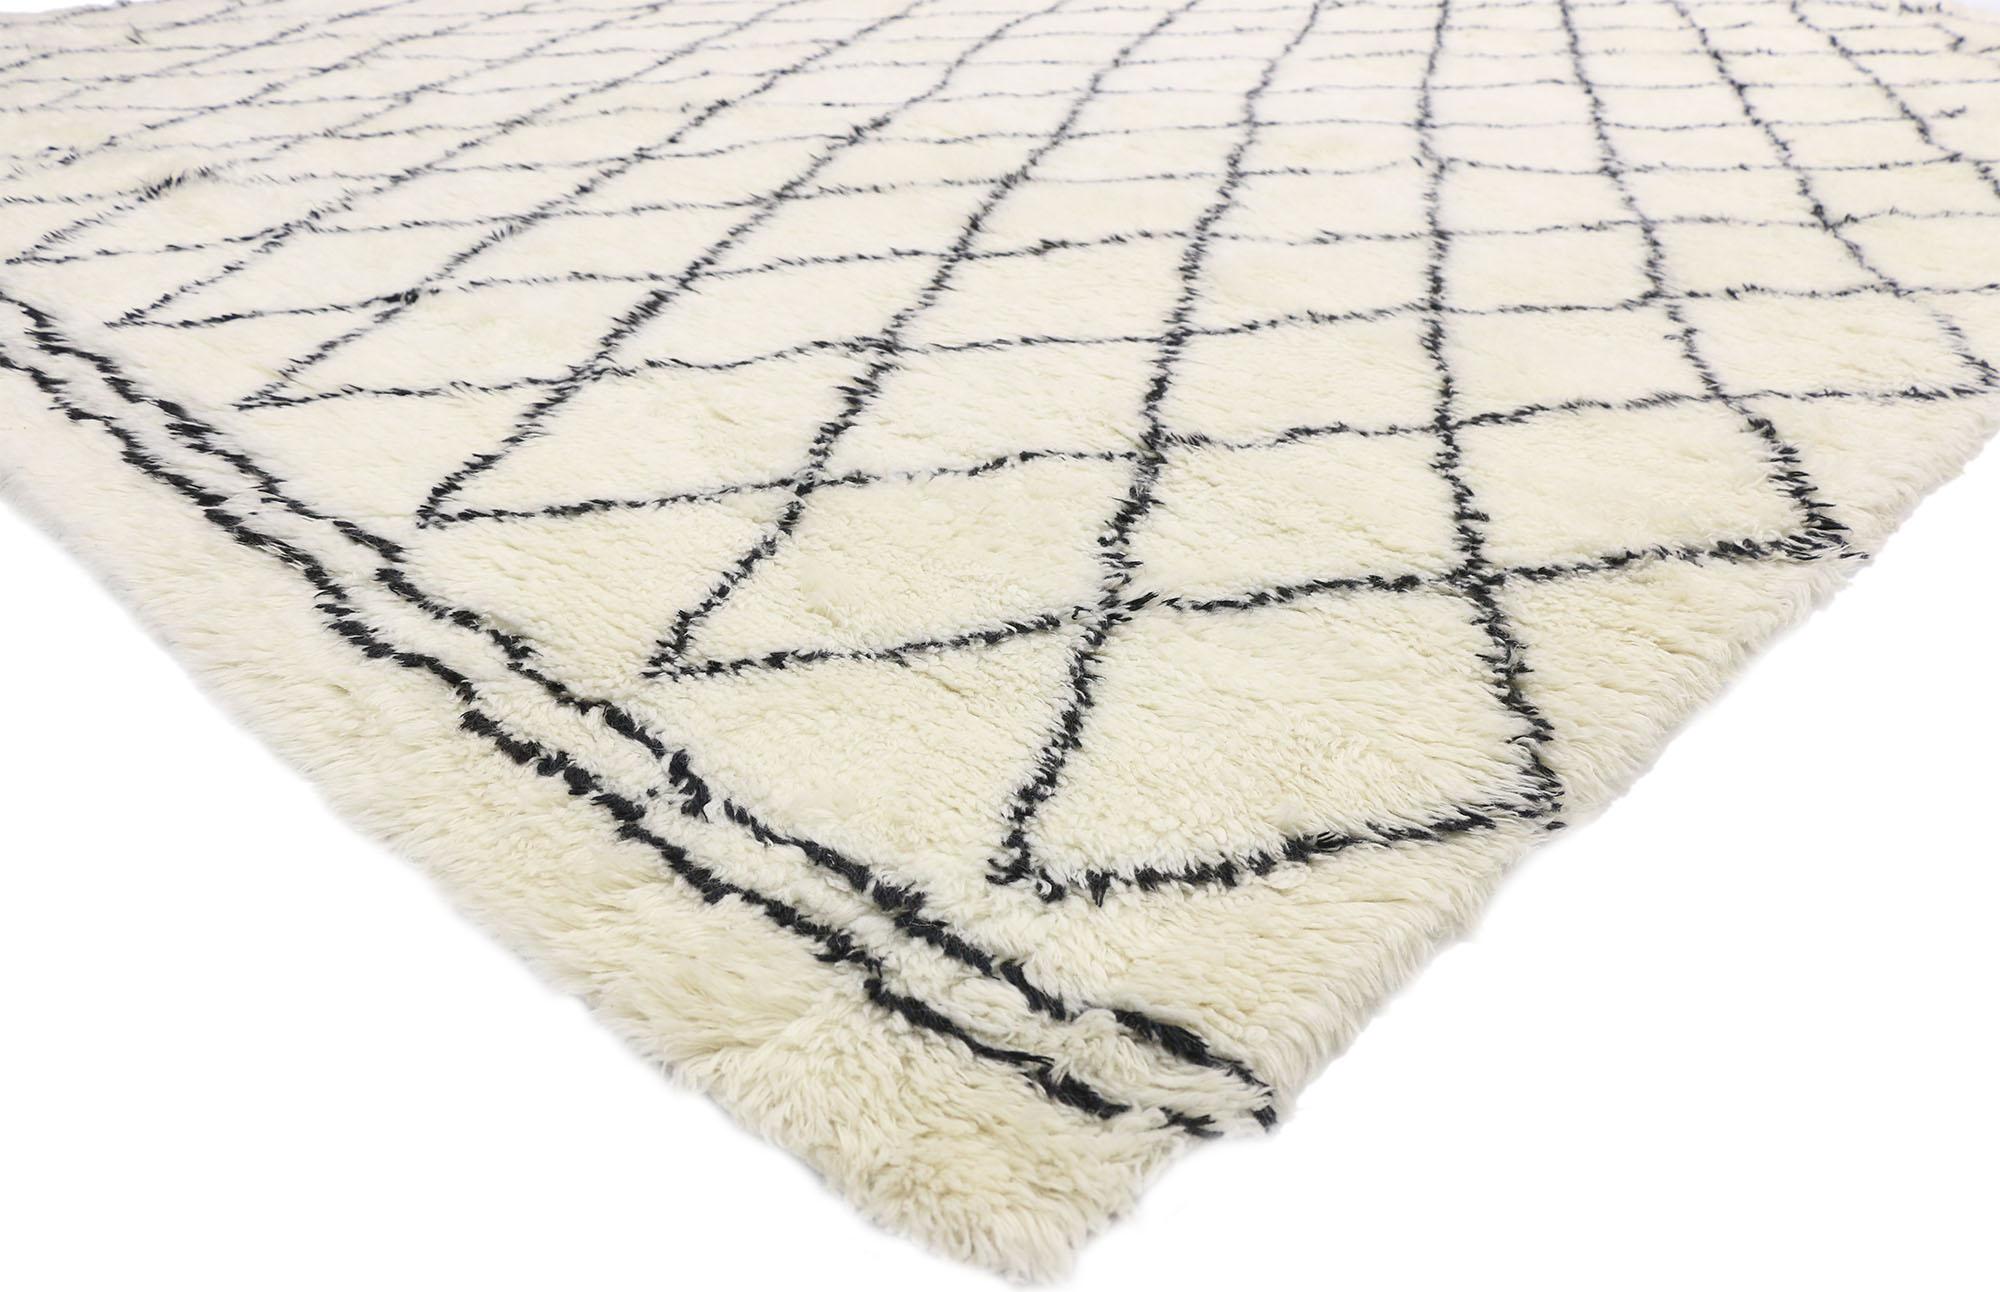 30423 New Contemporary Moroccan Style Rug with Cozy Hygge Vibes 10'03 x 13'02. This hand knotted wool contemporary Moroccan style rug features a simplistic all-over diamond lattice pattern spread across an abrashed creamy-vanilla field. The black